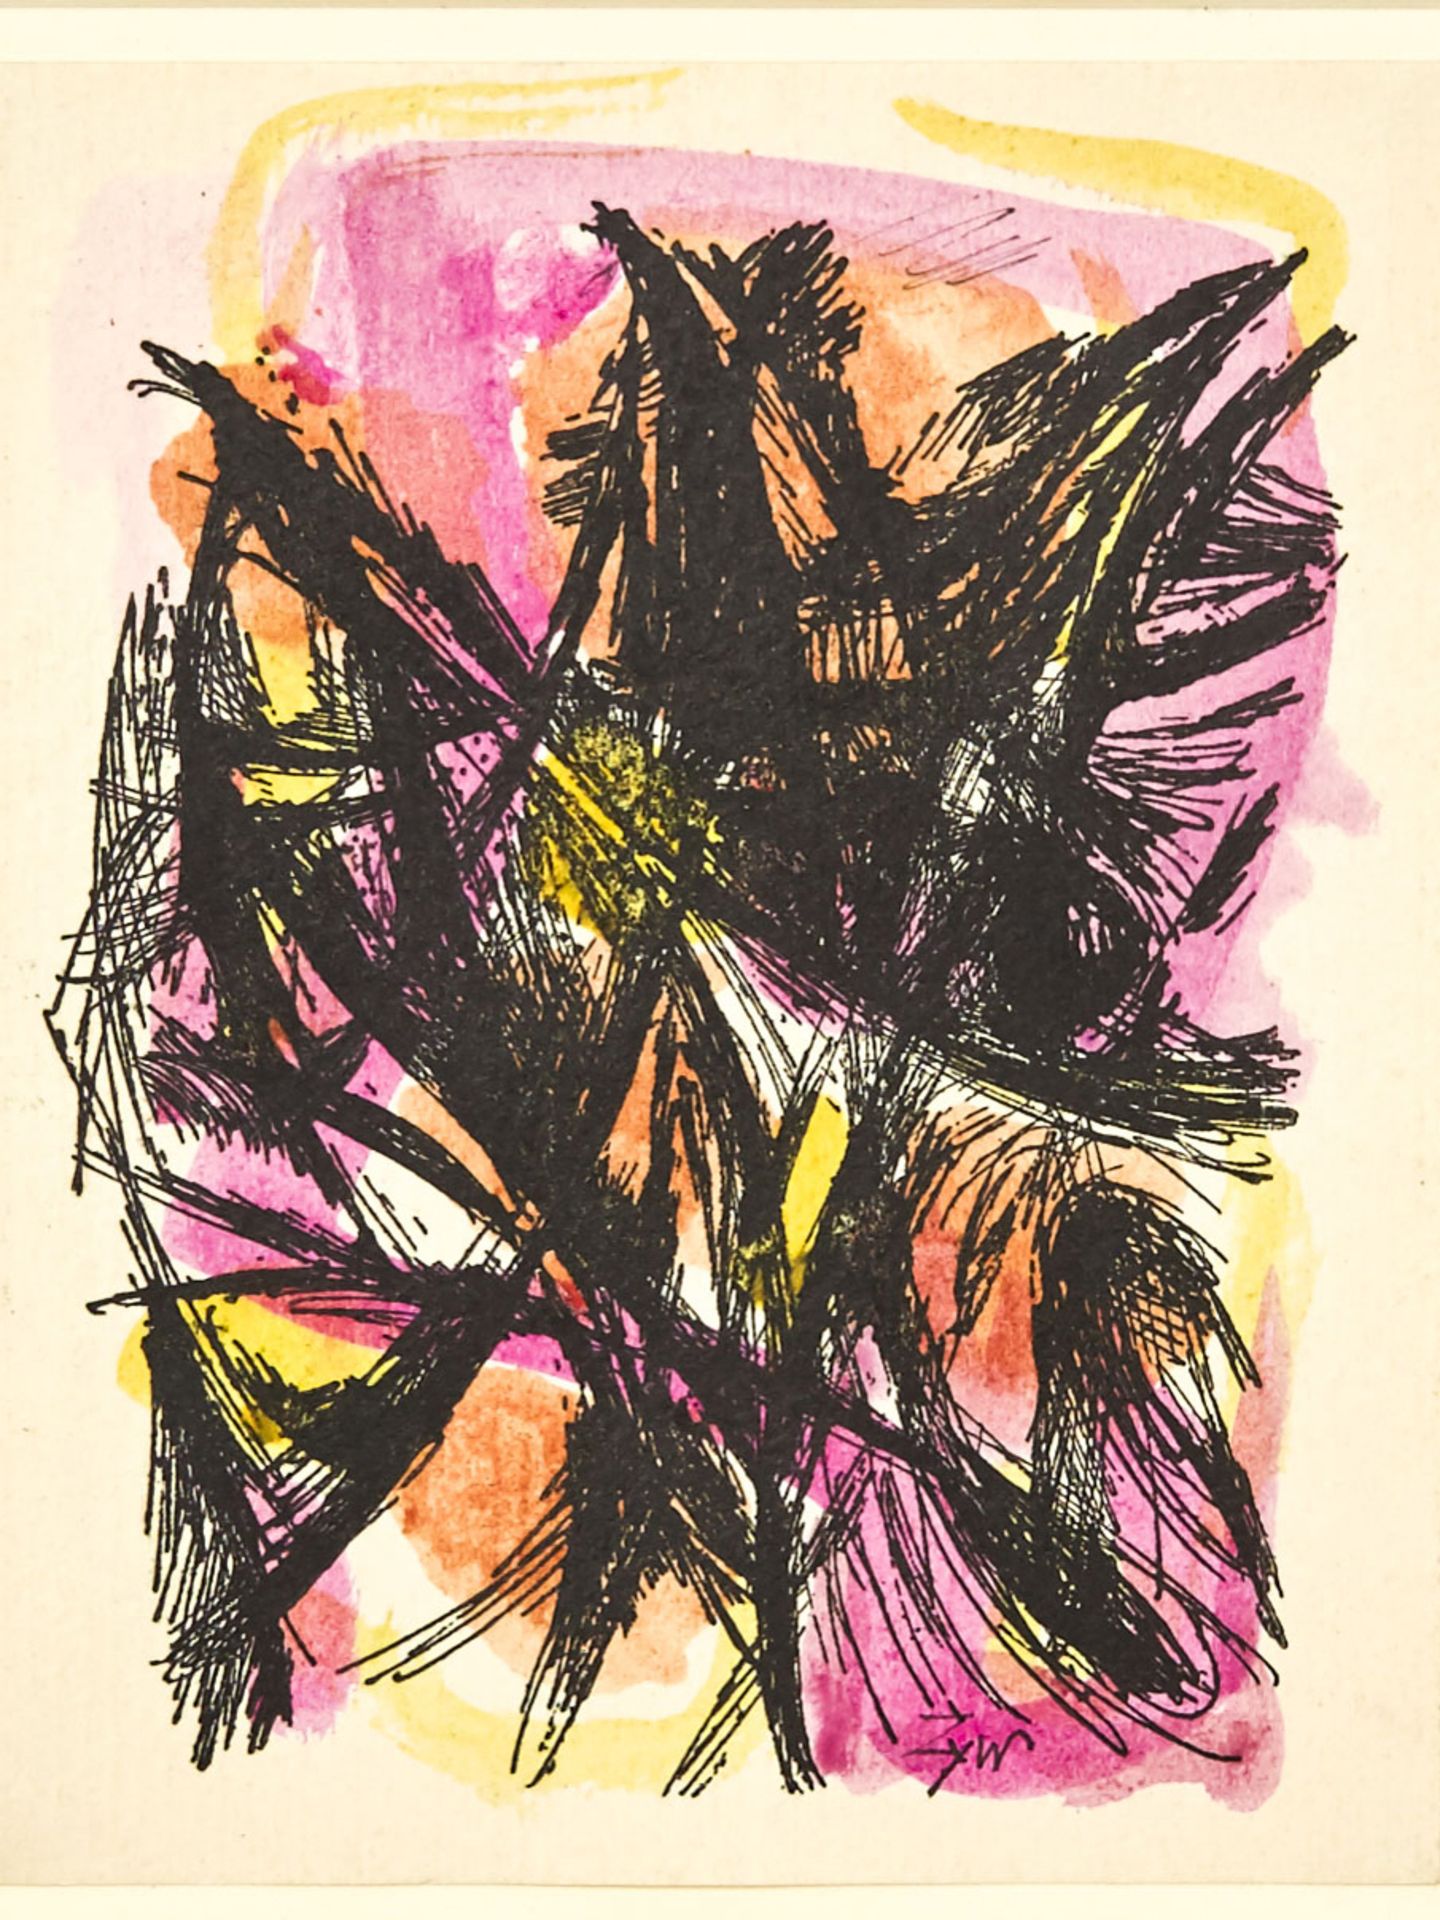 ALEKSANDER ZYW, ABSTRACT PEN AND WATERCOLOUR, 20TH C. - Image 2 of 3